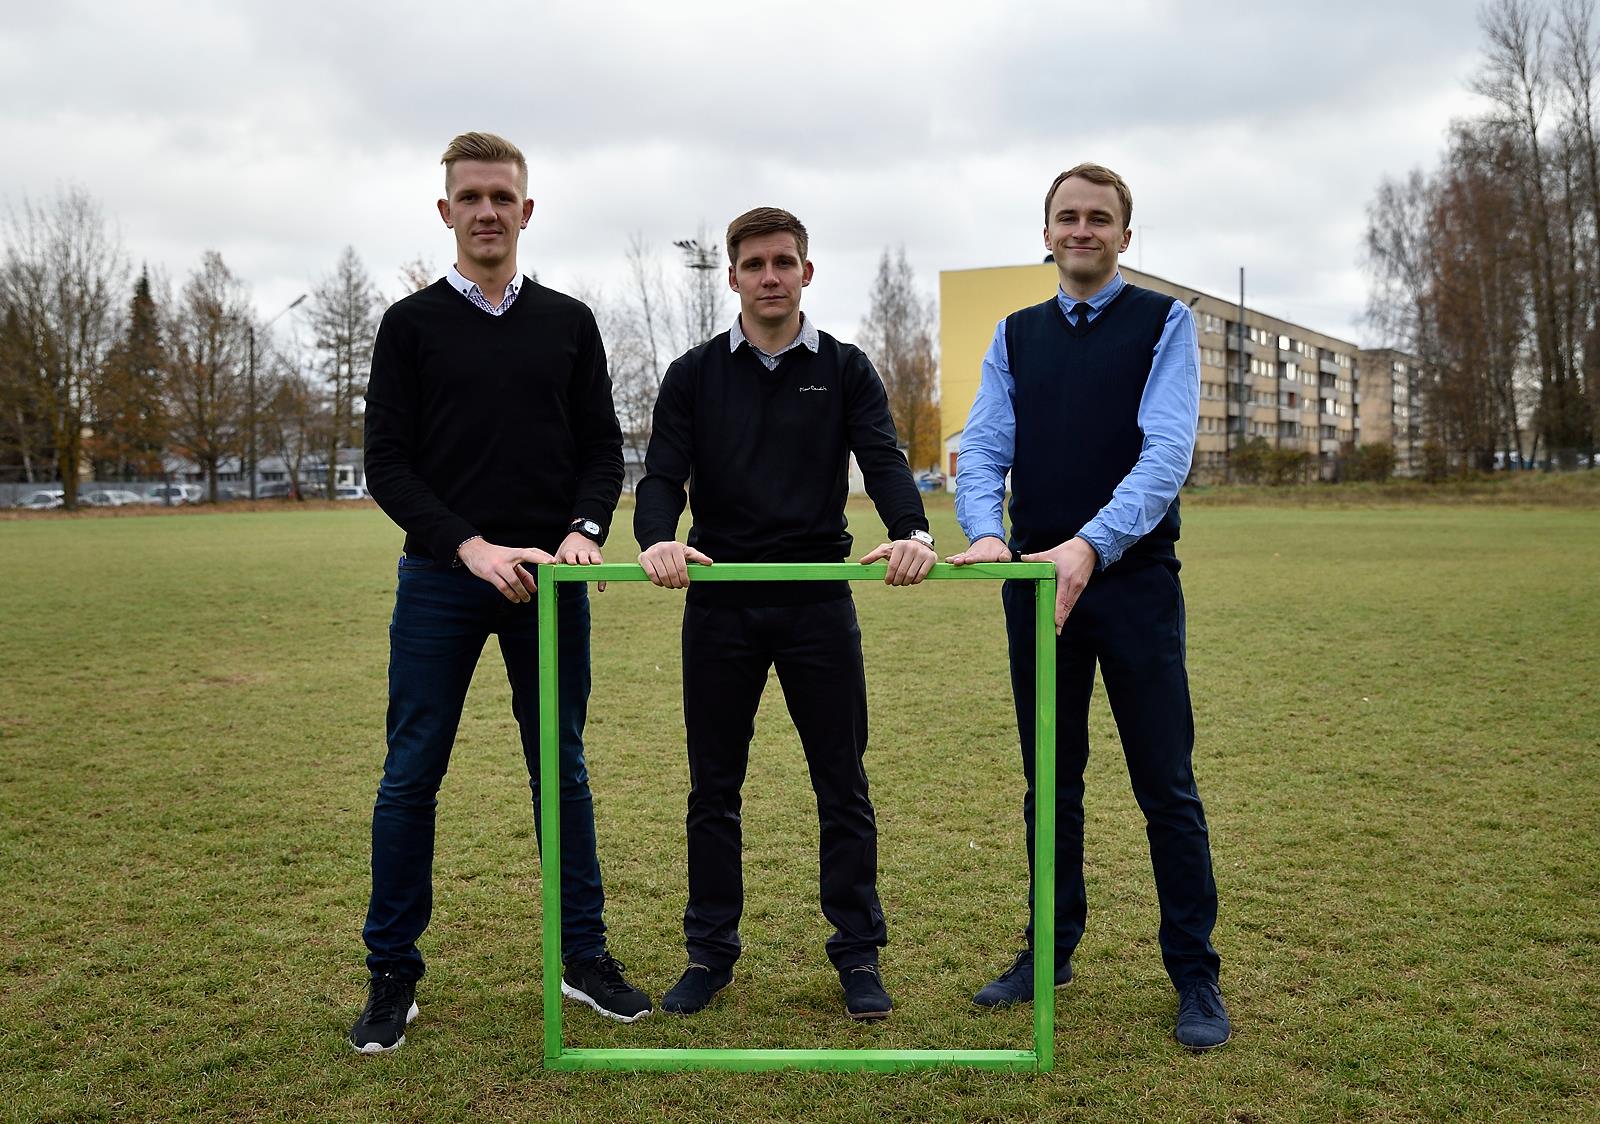 Three men standing on stadium grass while holding onto a wooden green square meter.